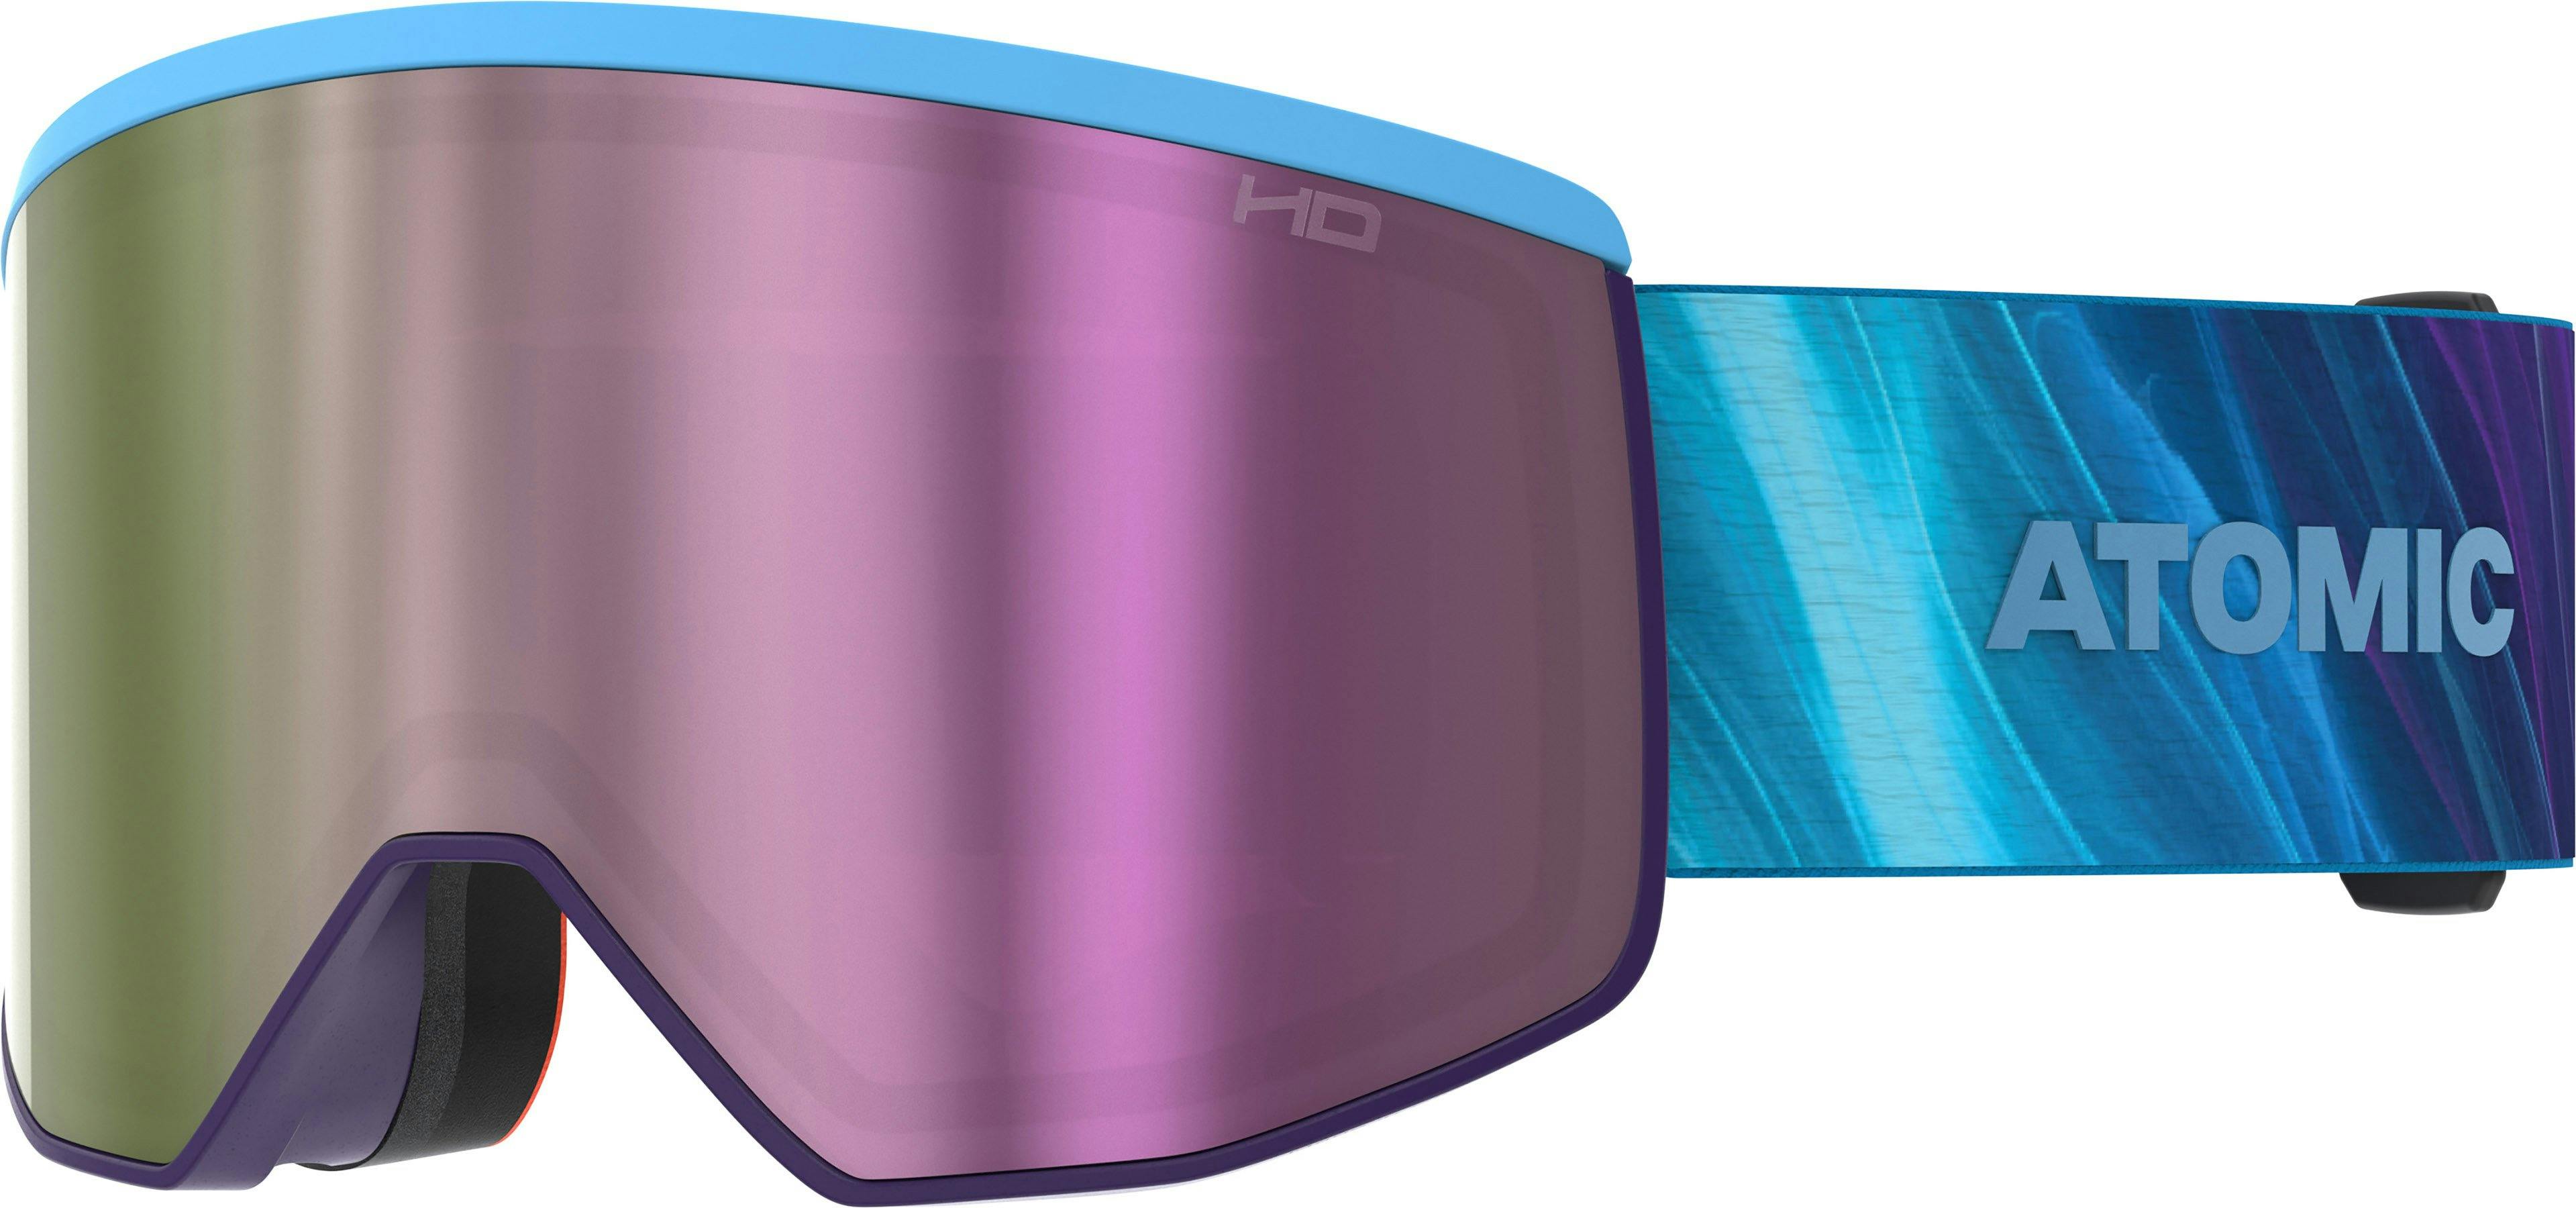 Product image for Four Pro HD Goggles